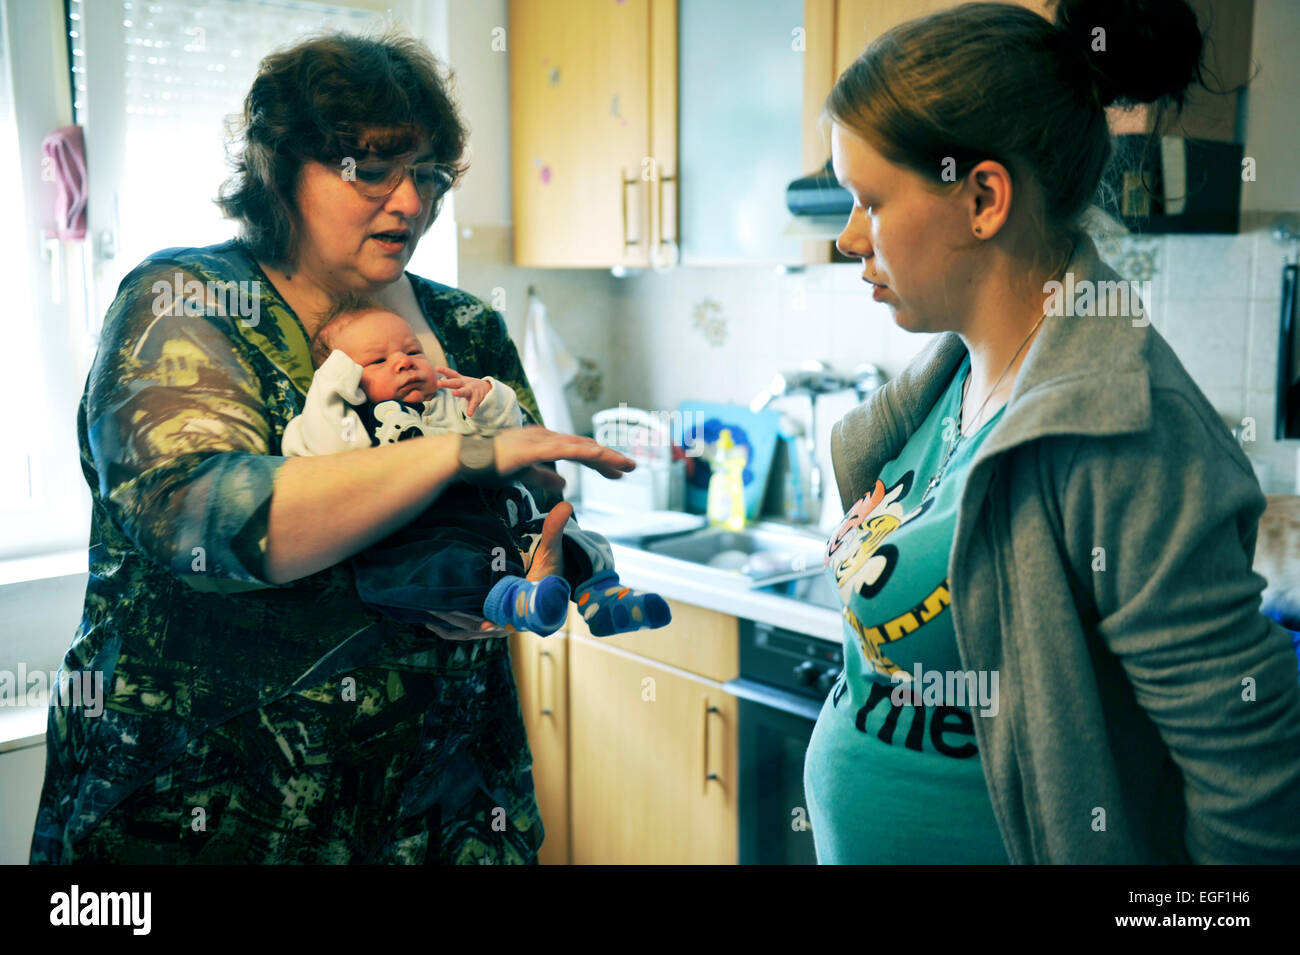 https://c8.alamy.com/comp/EGF1H6/the-home-visit-midwife-wins-for-prevention-and-care-for-the-birth-EGF1H6.jpg